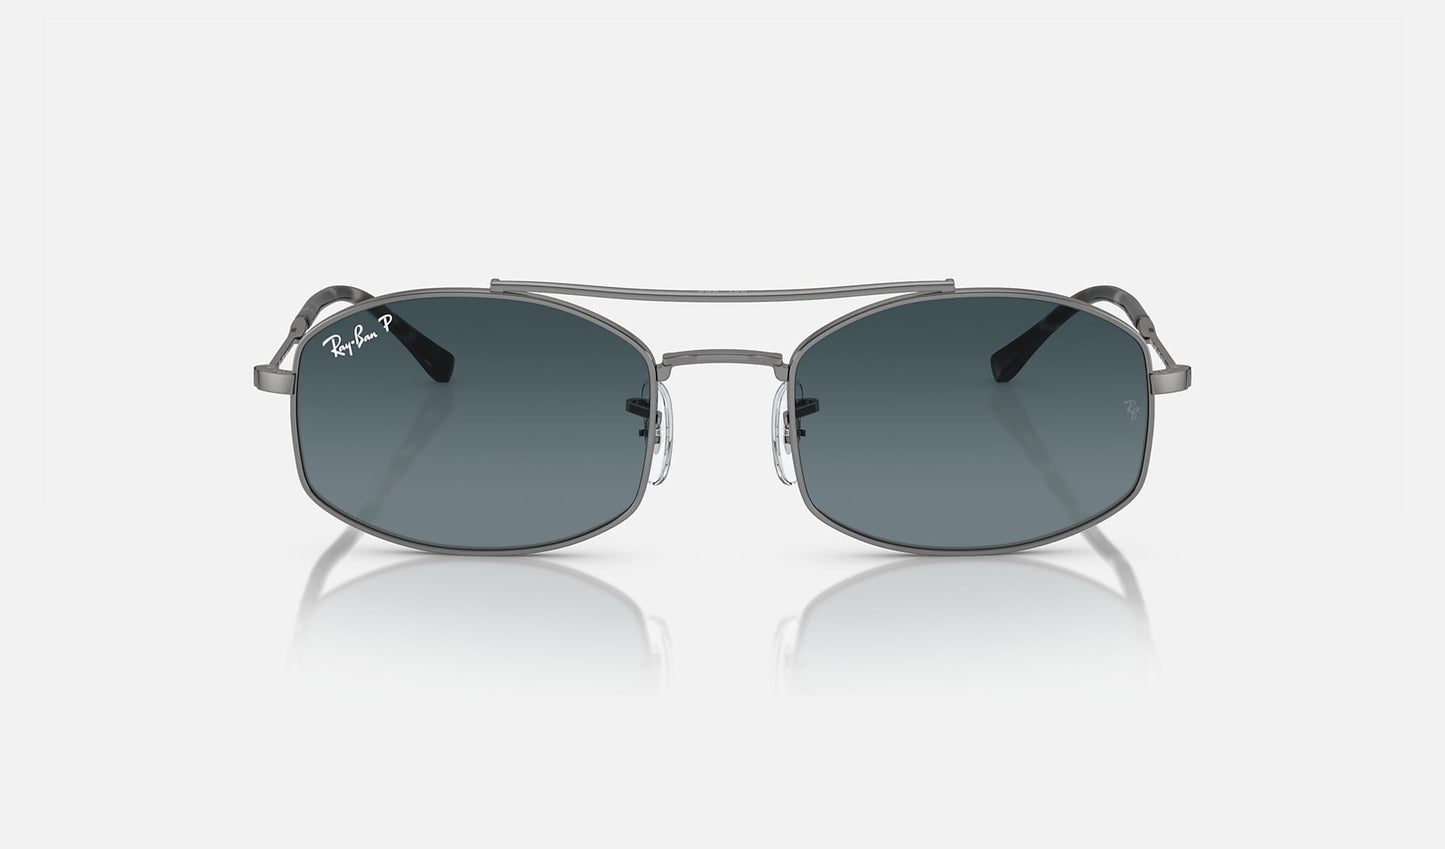 RB3719 - 004/S3 - Ray-Ban